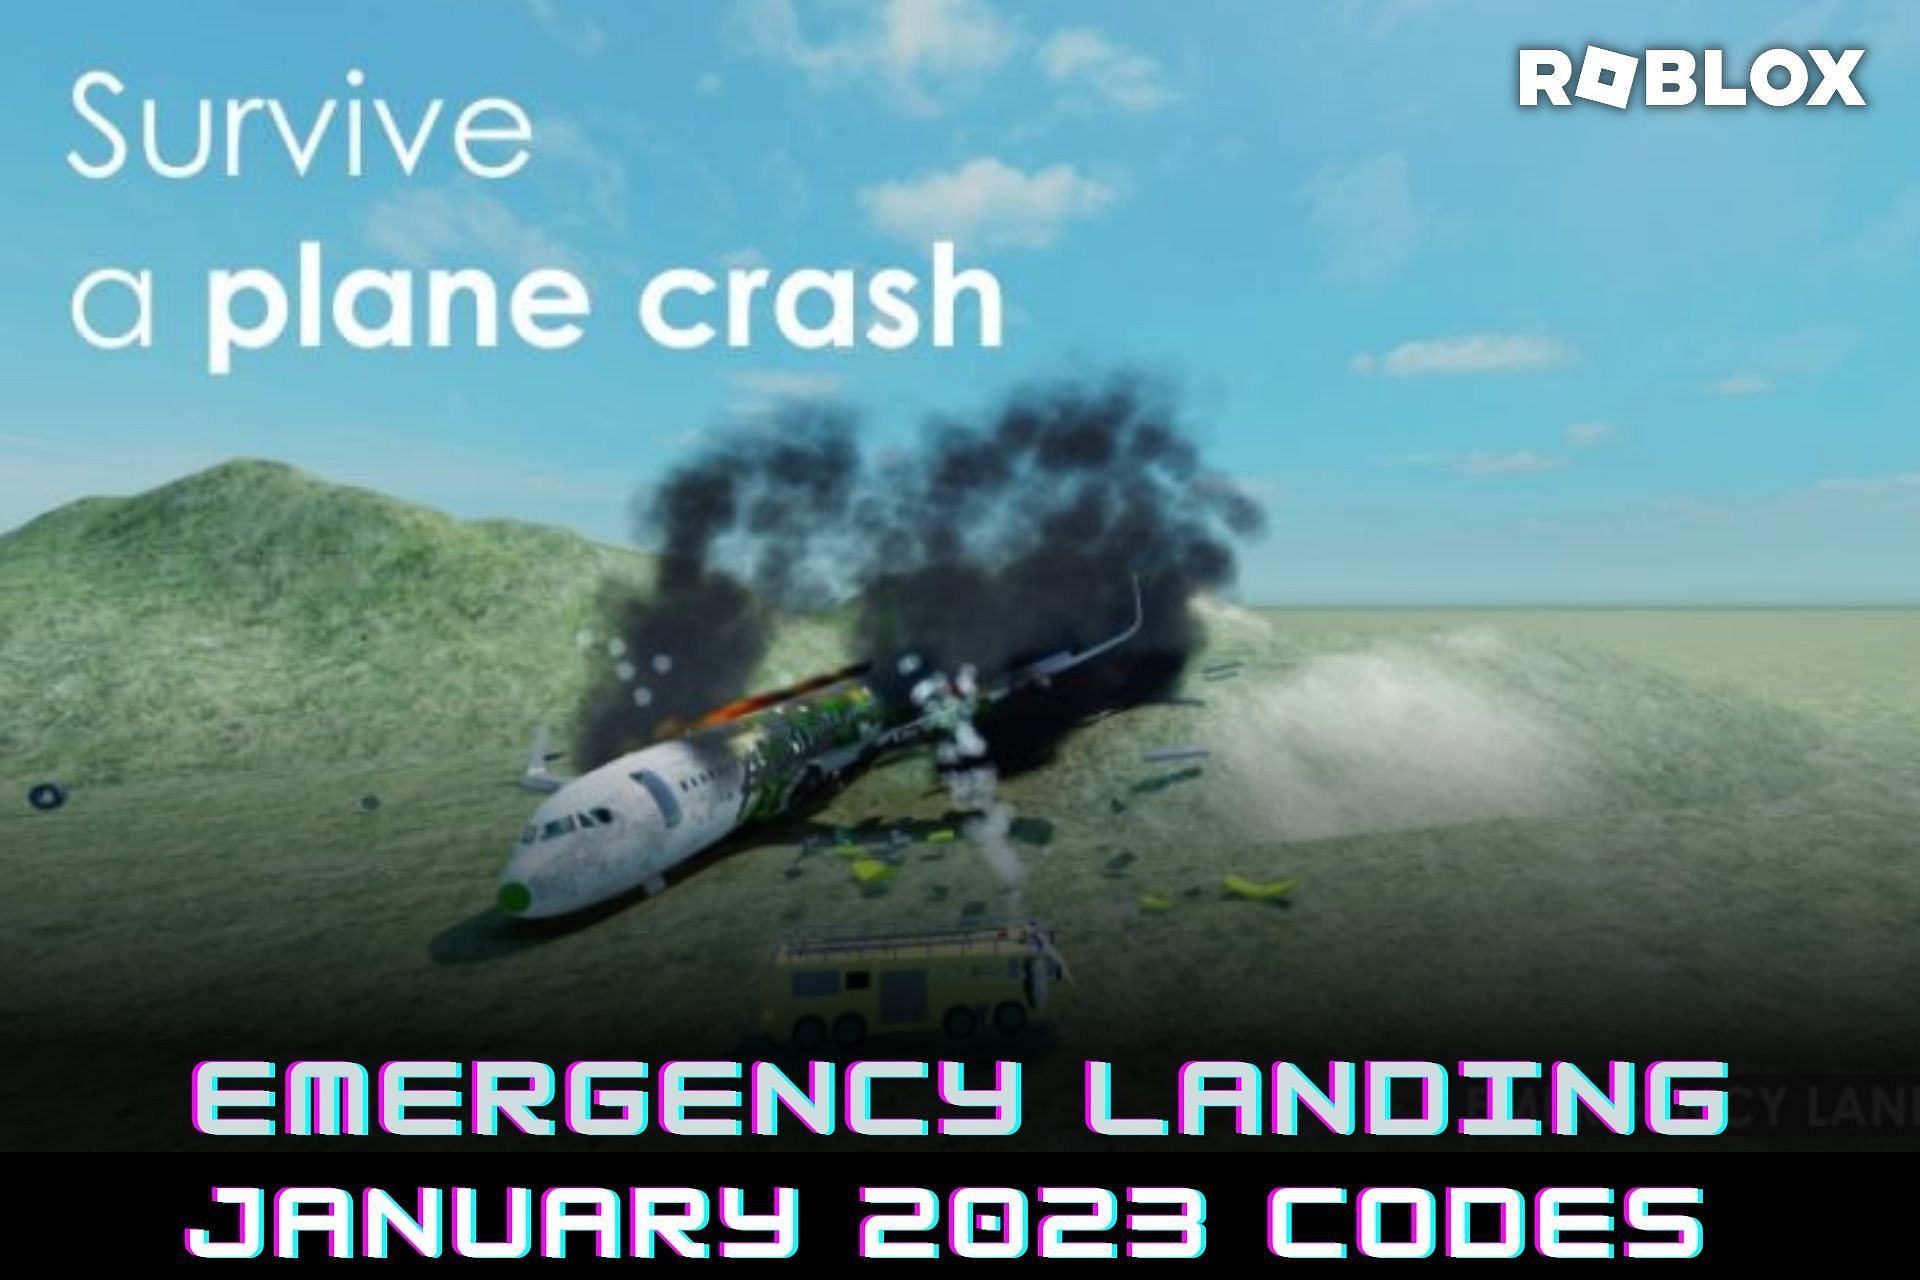 roblox-emergency-landing-codes-for-january-2023-free-eaglets-and-more